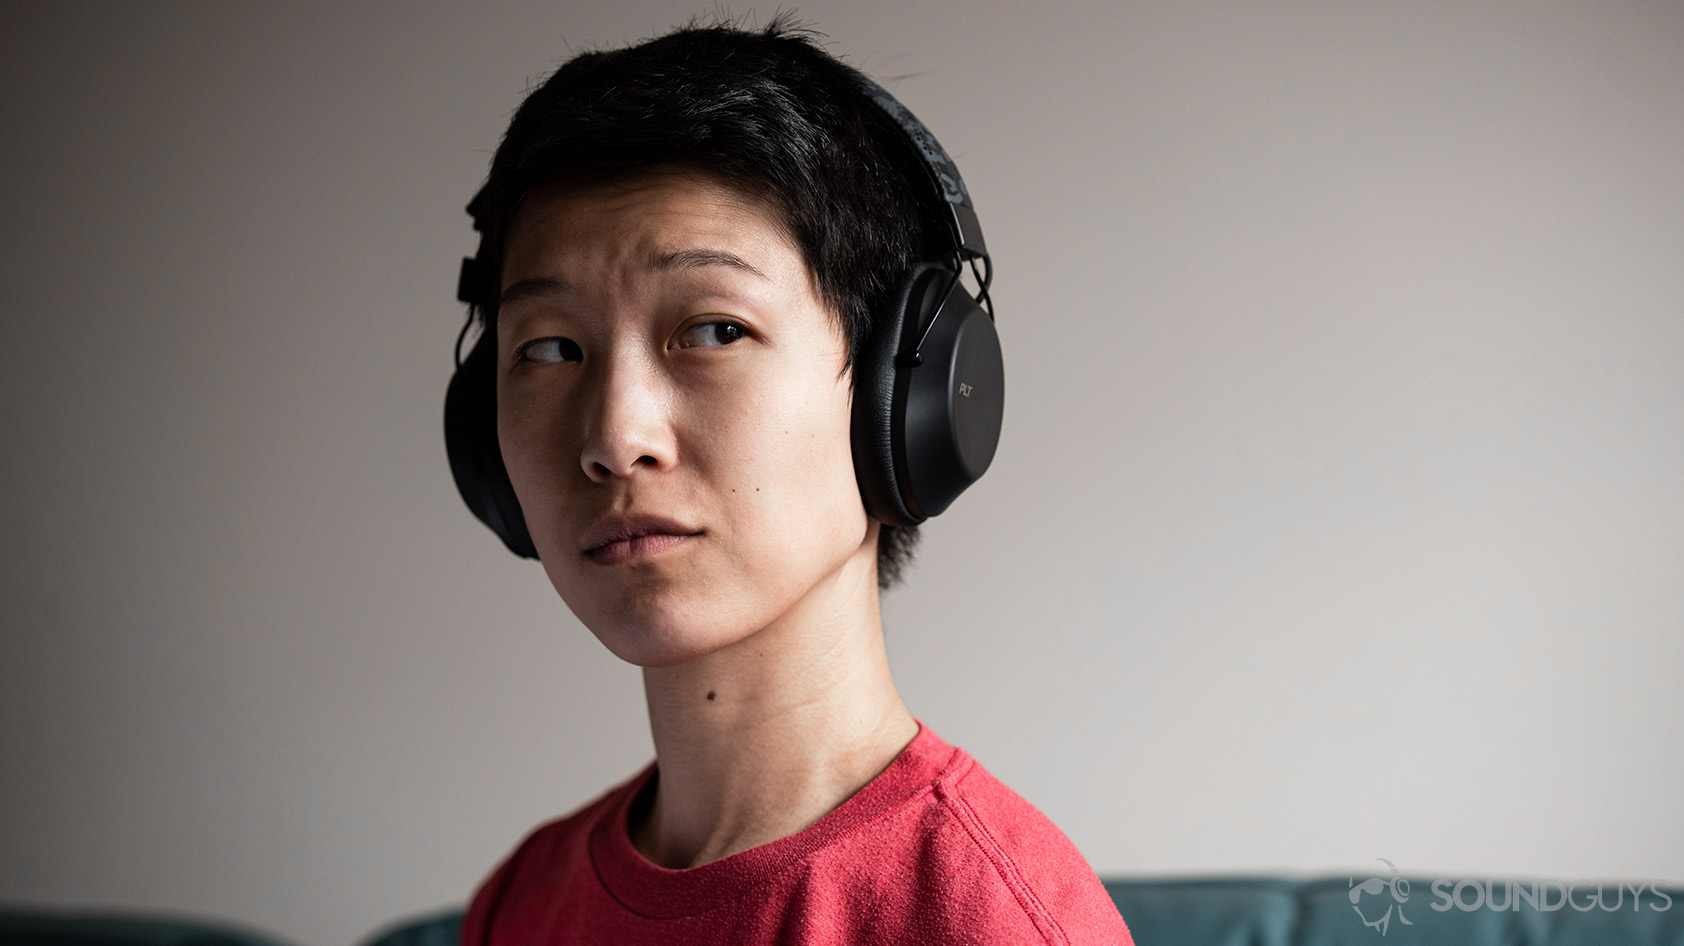 A picture of the Plantronics BackBeat Fit 6100 workout headphones worn by a woman against an off-white wall.